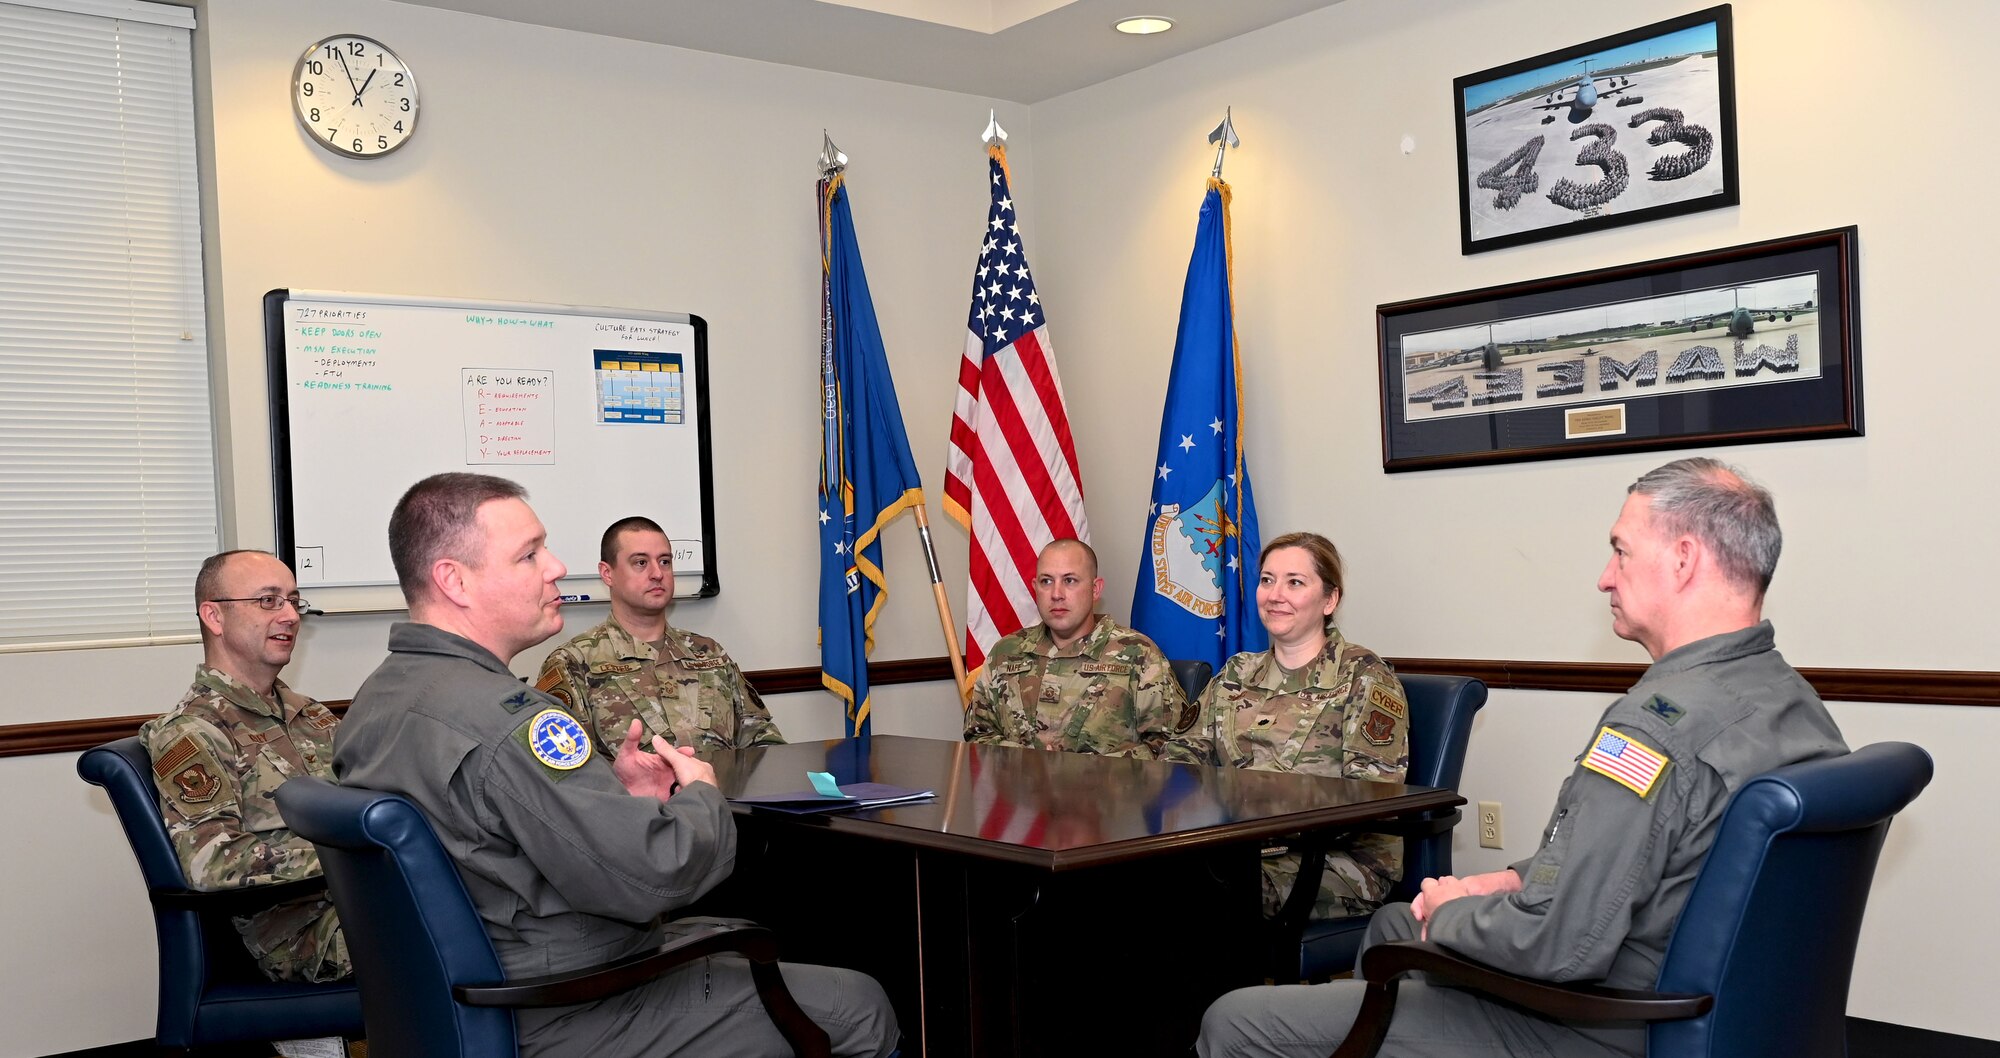 Col. Don Kelley, 960th Cyberspace Wing director of wing plans (left) and Col. Terry W. McClain, 433rd Airlift Wing commander (right) meet with Air Force Reserve Command A3, Air, Space, Information Operations staff members; Col. Matthew Trovinger, current operations division chief; Senior Master Sgt. David Lester, cyber standards and evaluation; Master Sgt. David Nafe, cyber training manager; and Lt. Col. Melissa Milas, information warfare branch chief, March 3, 2022, at Joint Base San Antonio-Lackland, Texas. The A3 team met with 960th CW and 433rd AW personnel in an effort familiarize themselves with the cyberspace wing’s non-traditional mission set and evaluate the playbook for future compliance inspections. (U.S. Air Force photo by Samantha Mathison)